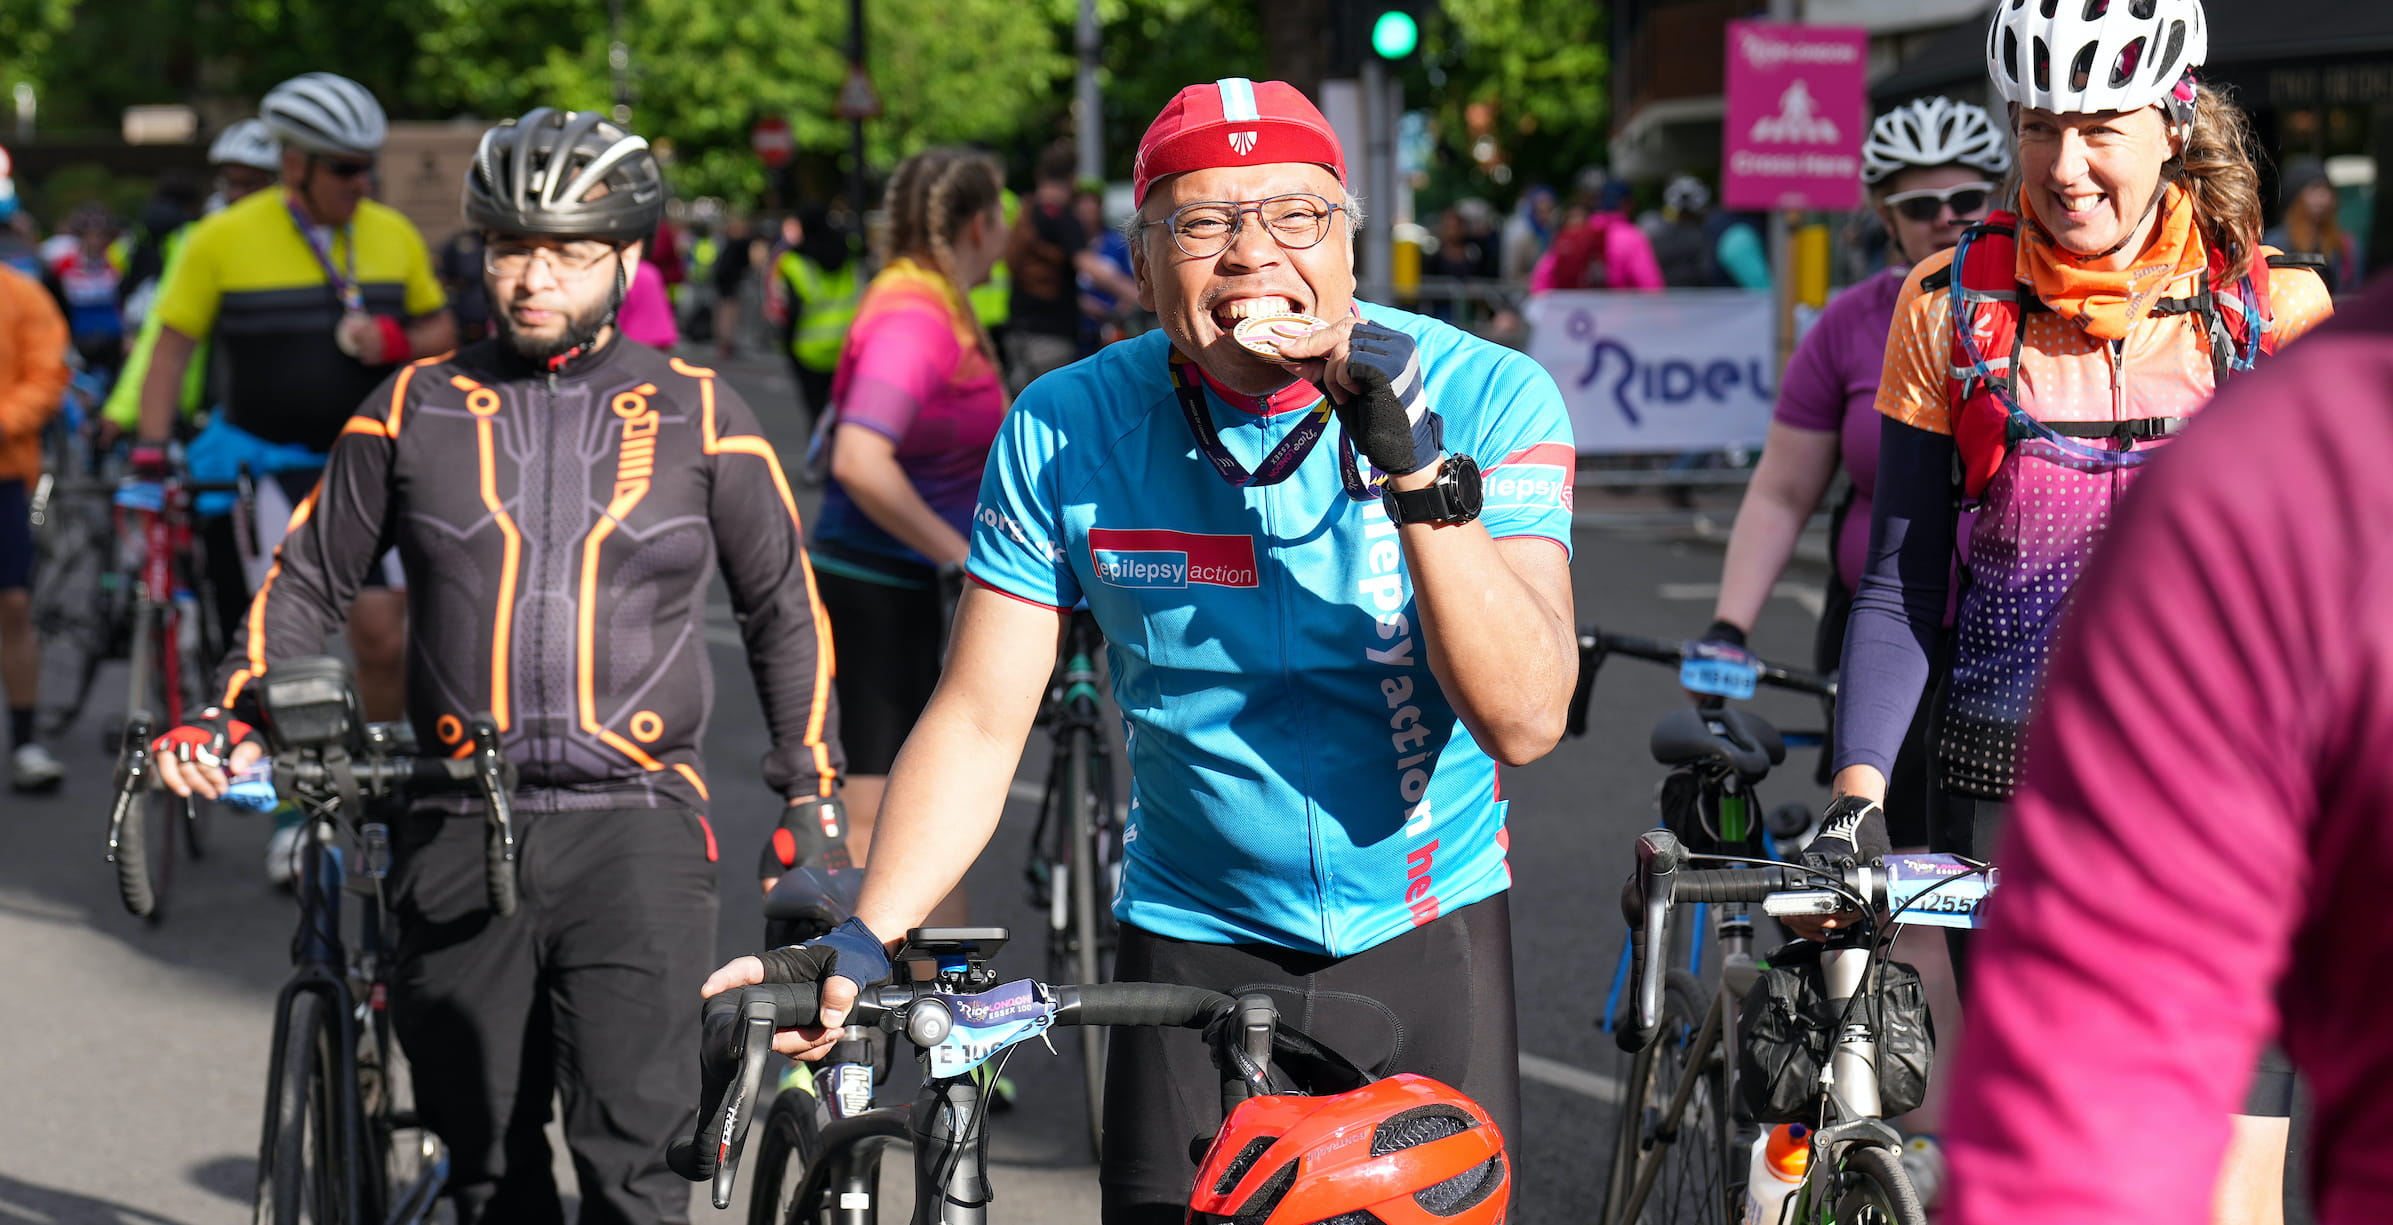 A rider bites their medal after completing the RideLondon-Essex sportive